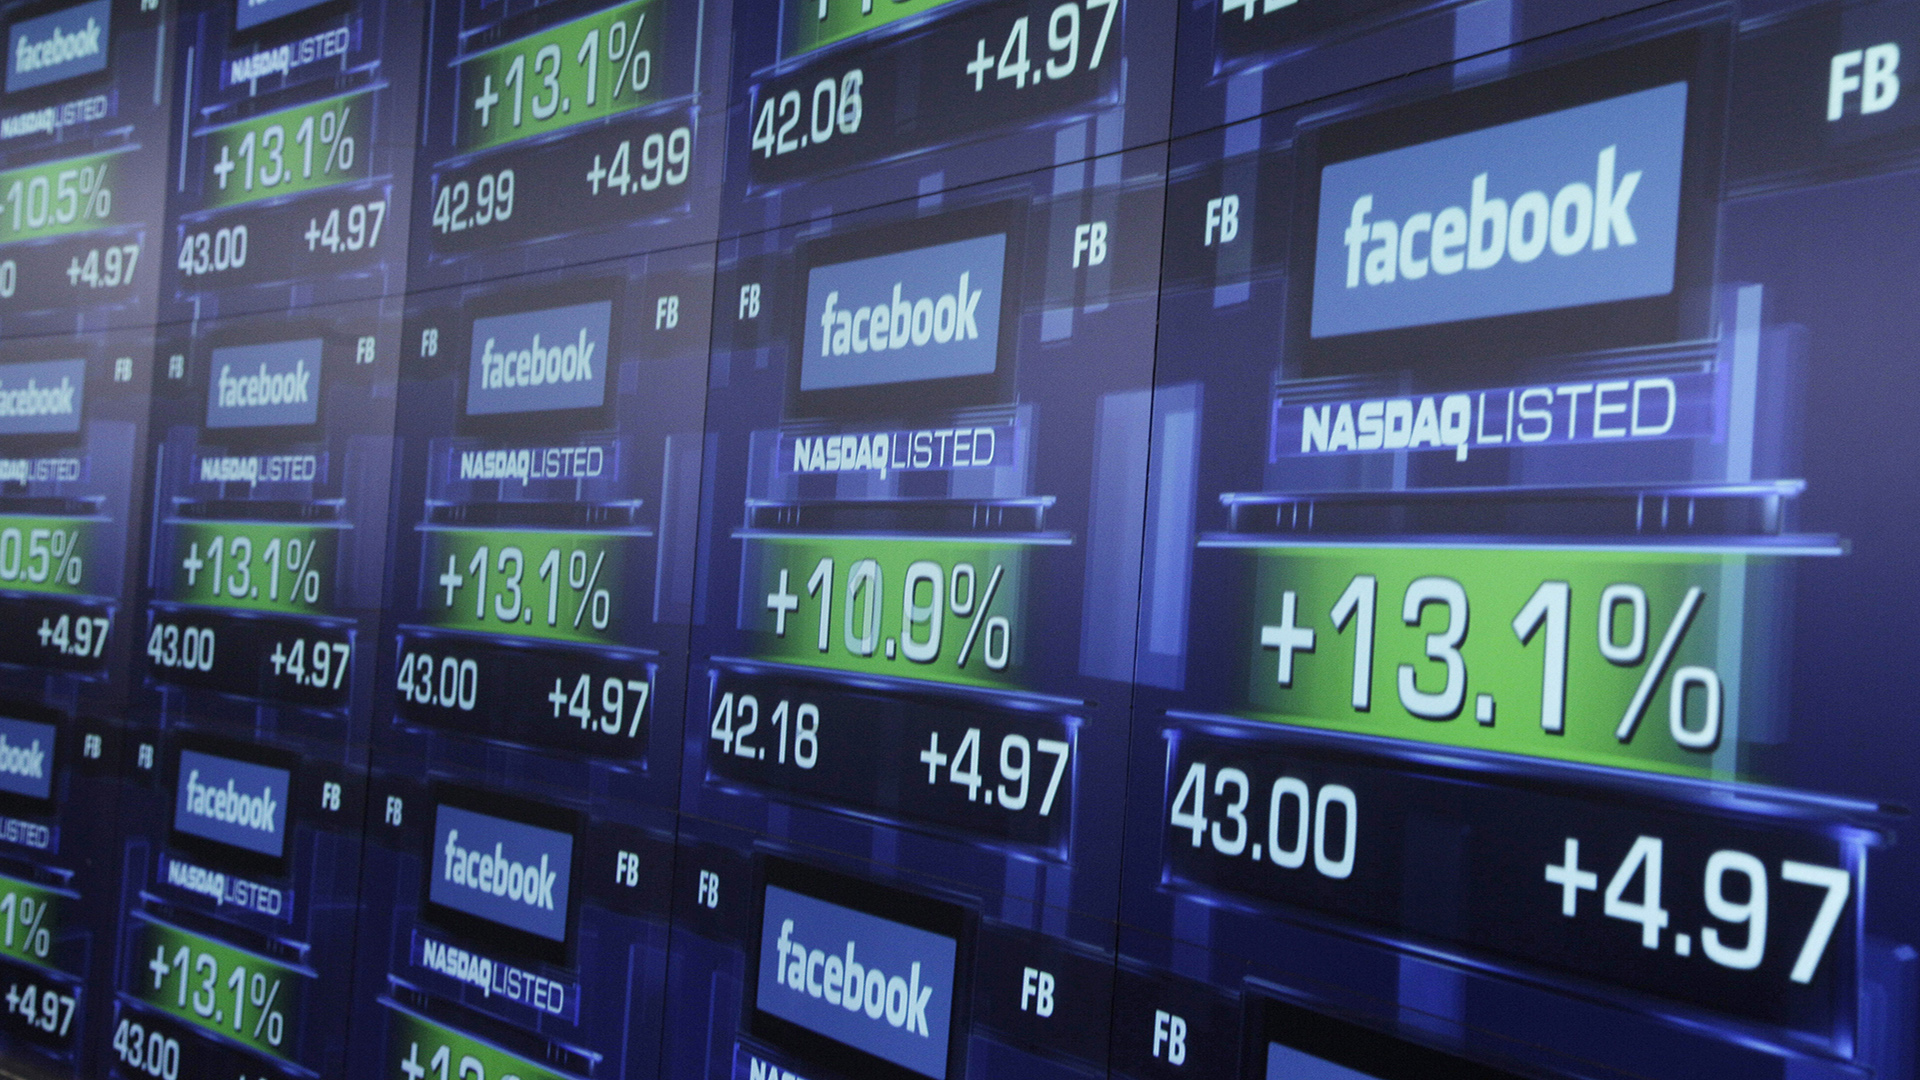 Facebook Stock Review and Opinion - Empresa-Journal1920 x 1080